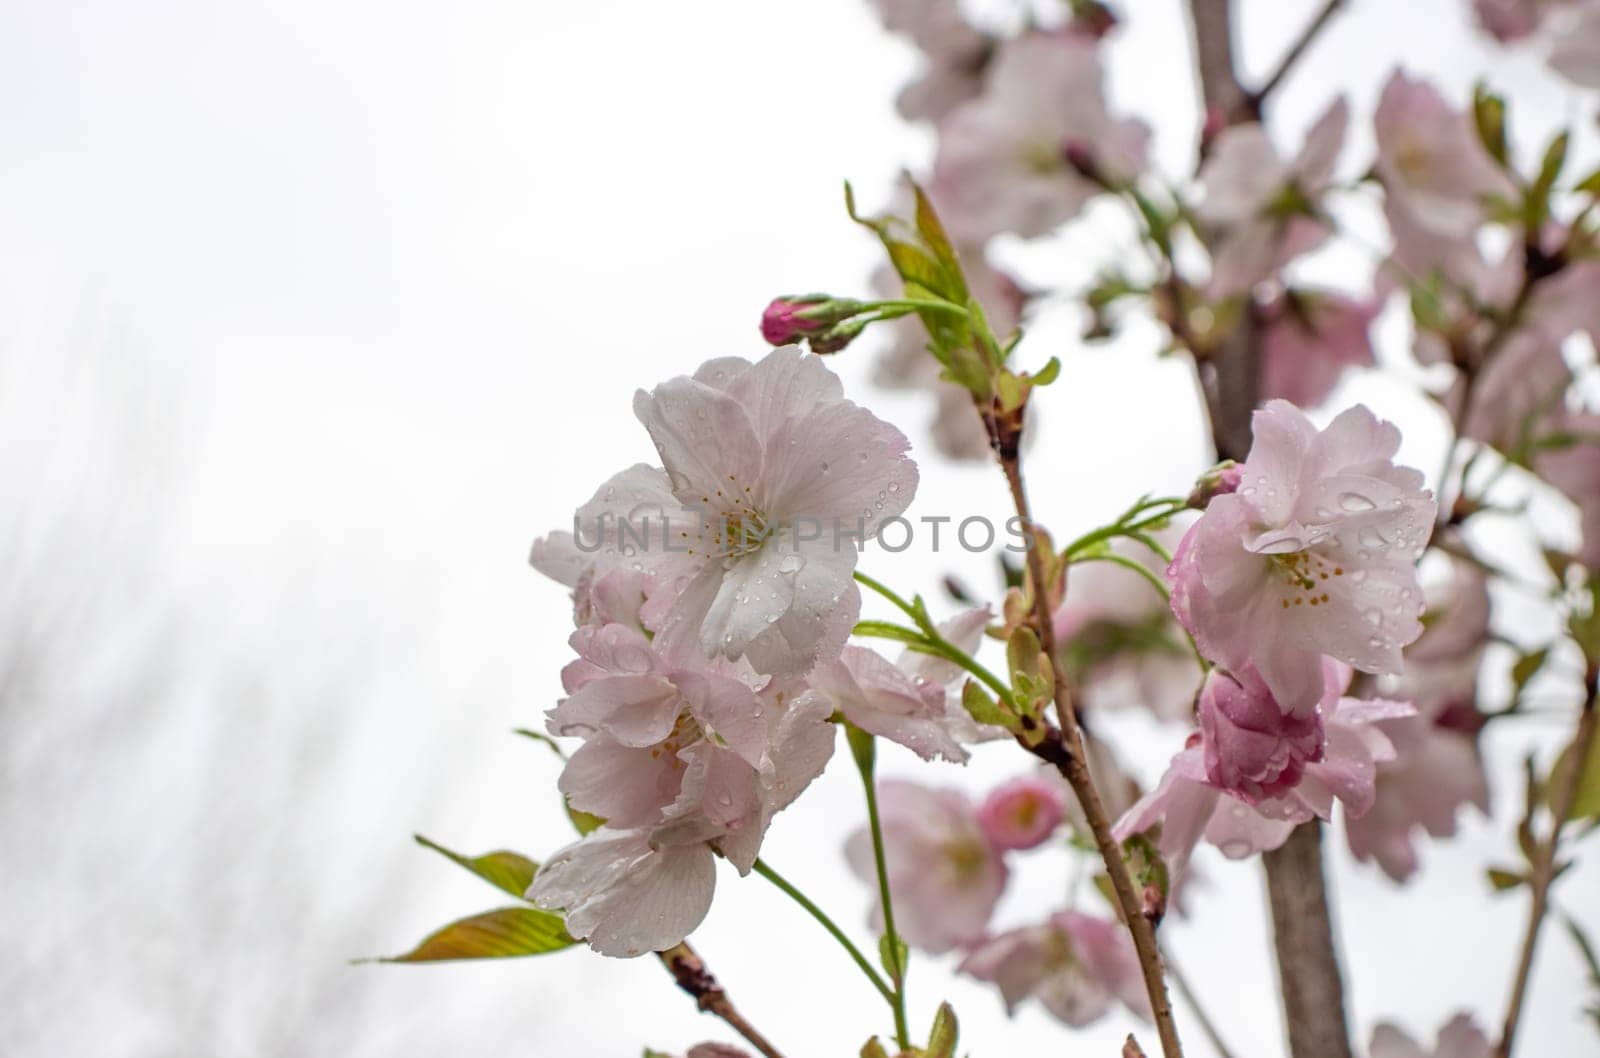 Close up pink sakura flower with rain drops concept photo. Photography with blurred background. Countryside at spring season. Spring garden blossom background